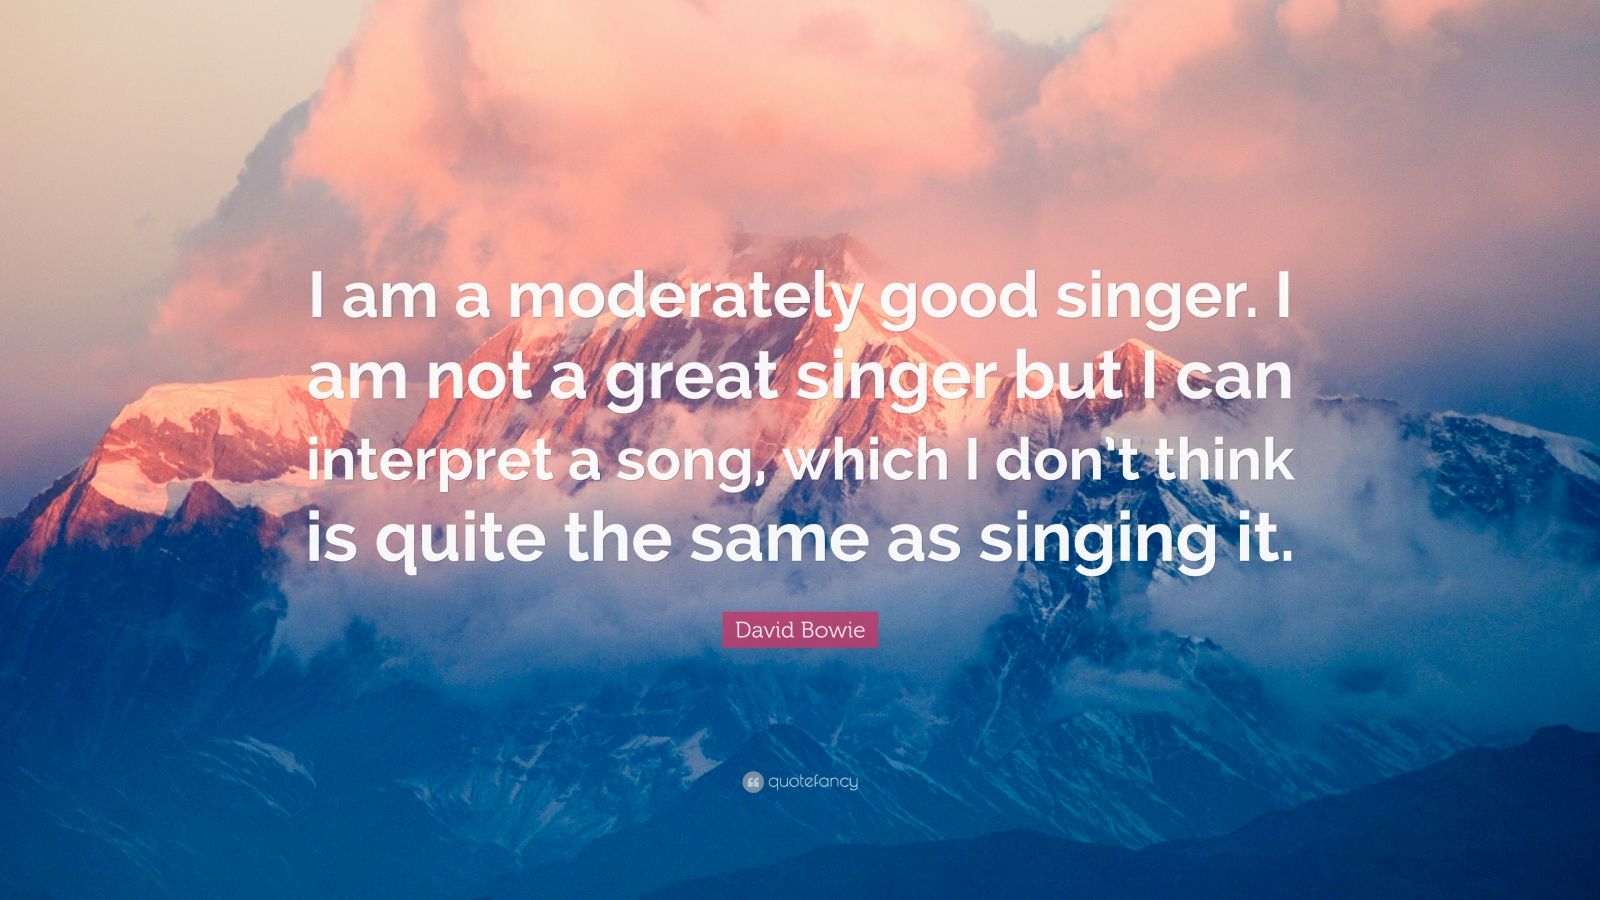 David Bowie Quote: “I am a moderately good singer. I am not a great